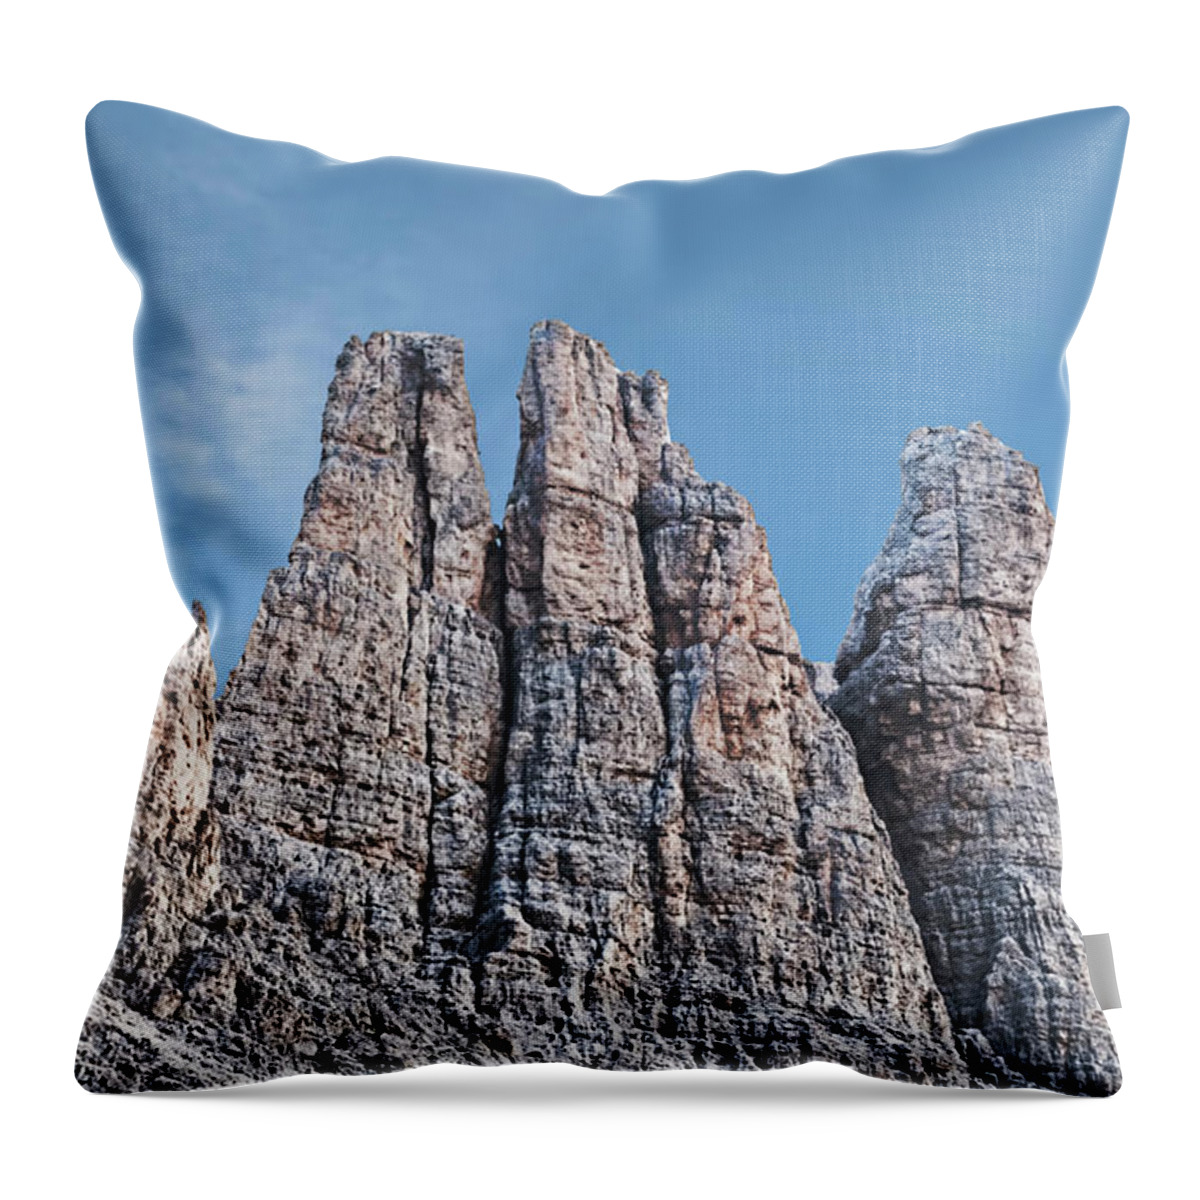 Tranquility Throw Pillow featuring the photograph Vajolet Towers, Dolomites, Catinaccio by Paolo Negri